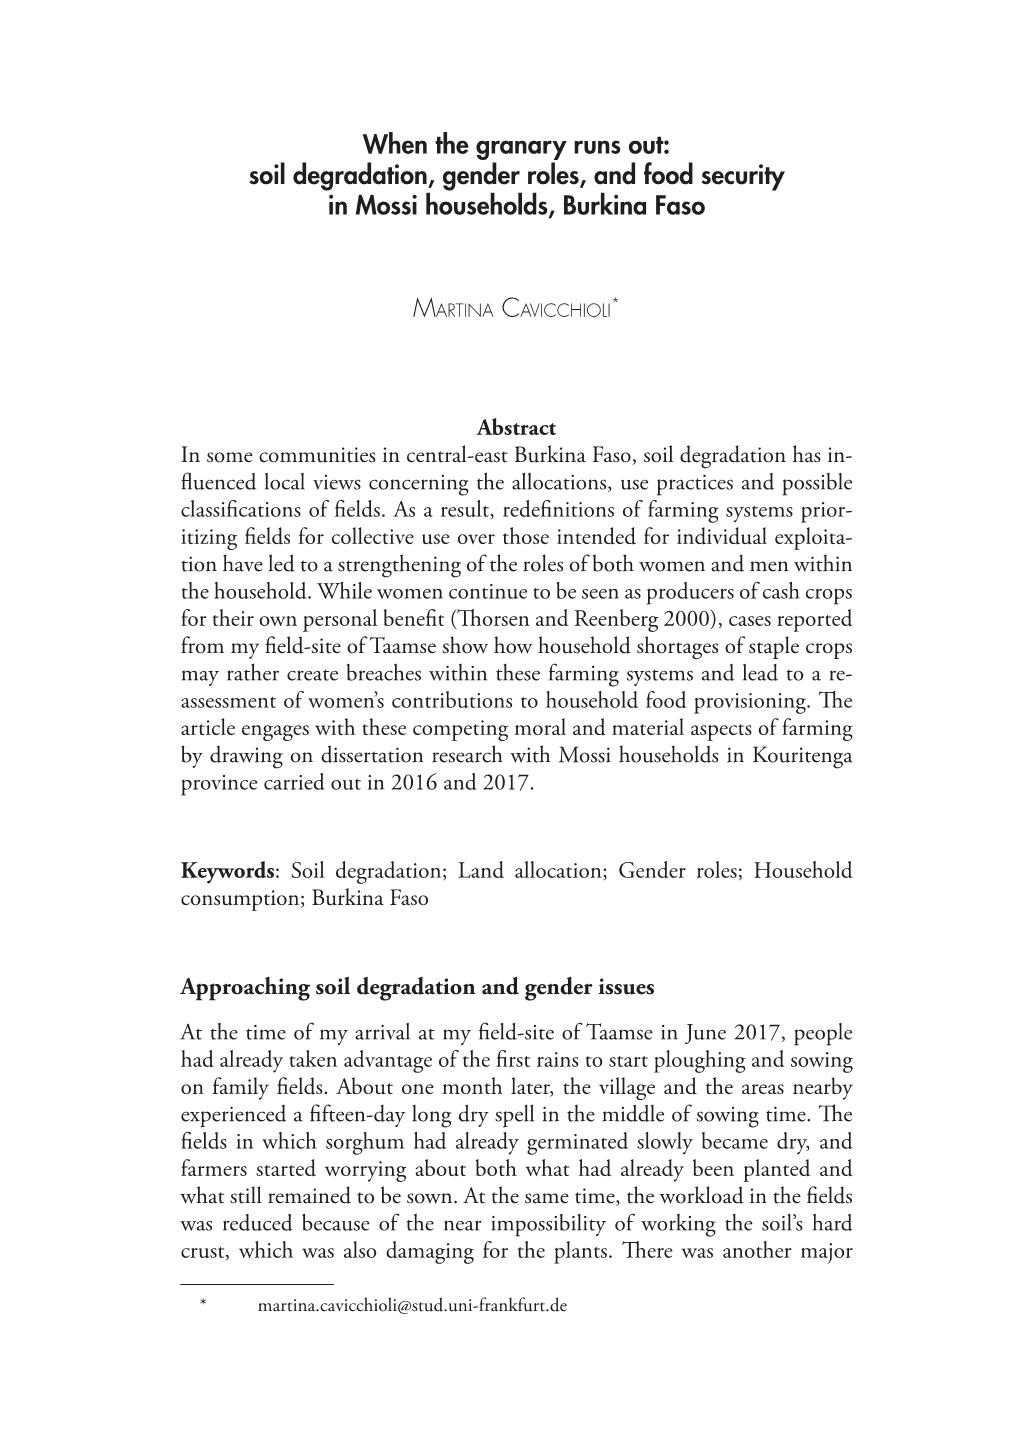 Soil Degradation, Gender Roles, and Food Security in Mossi Households, Burkina Faso